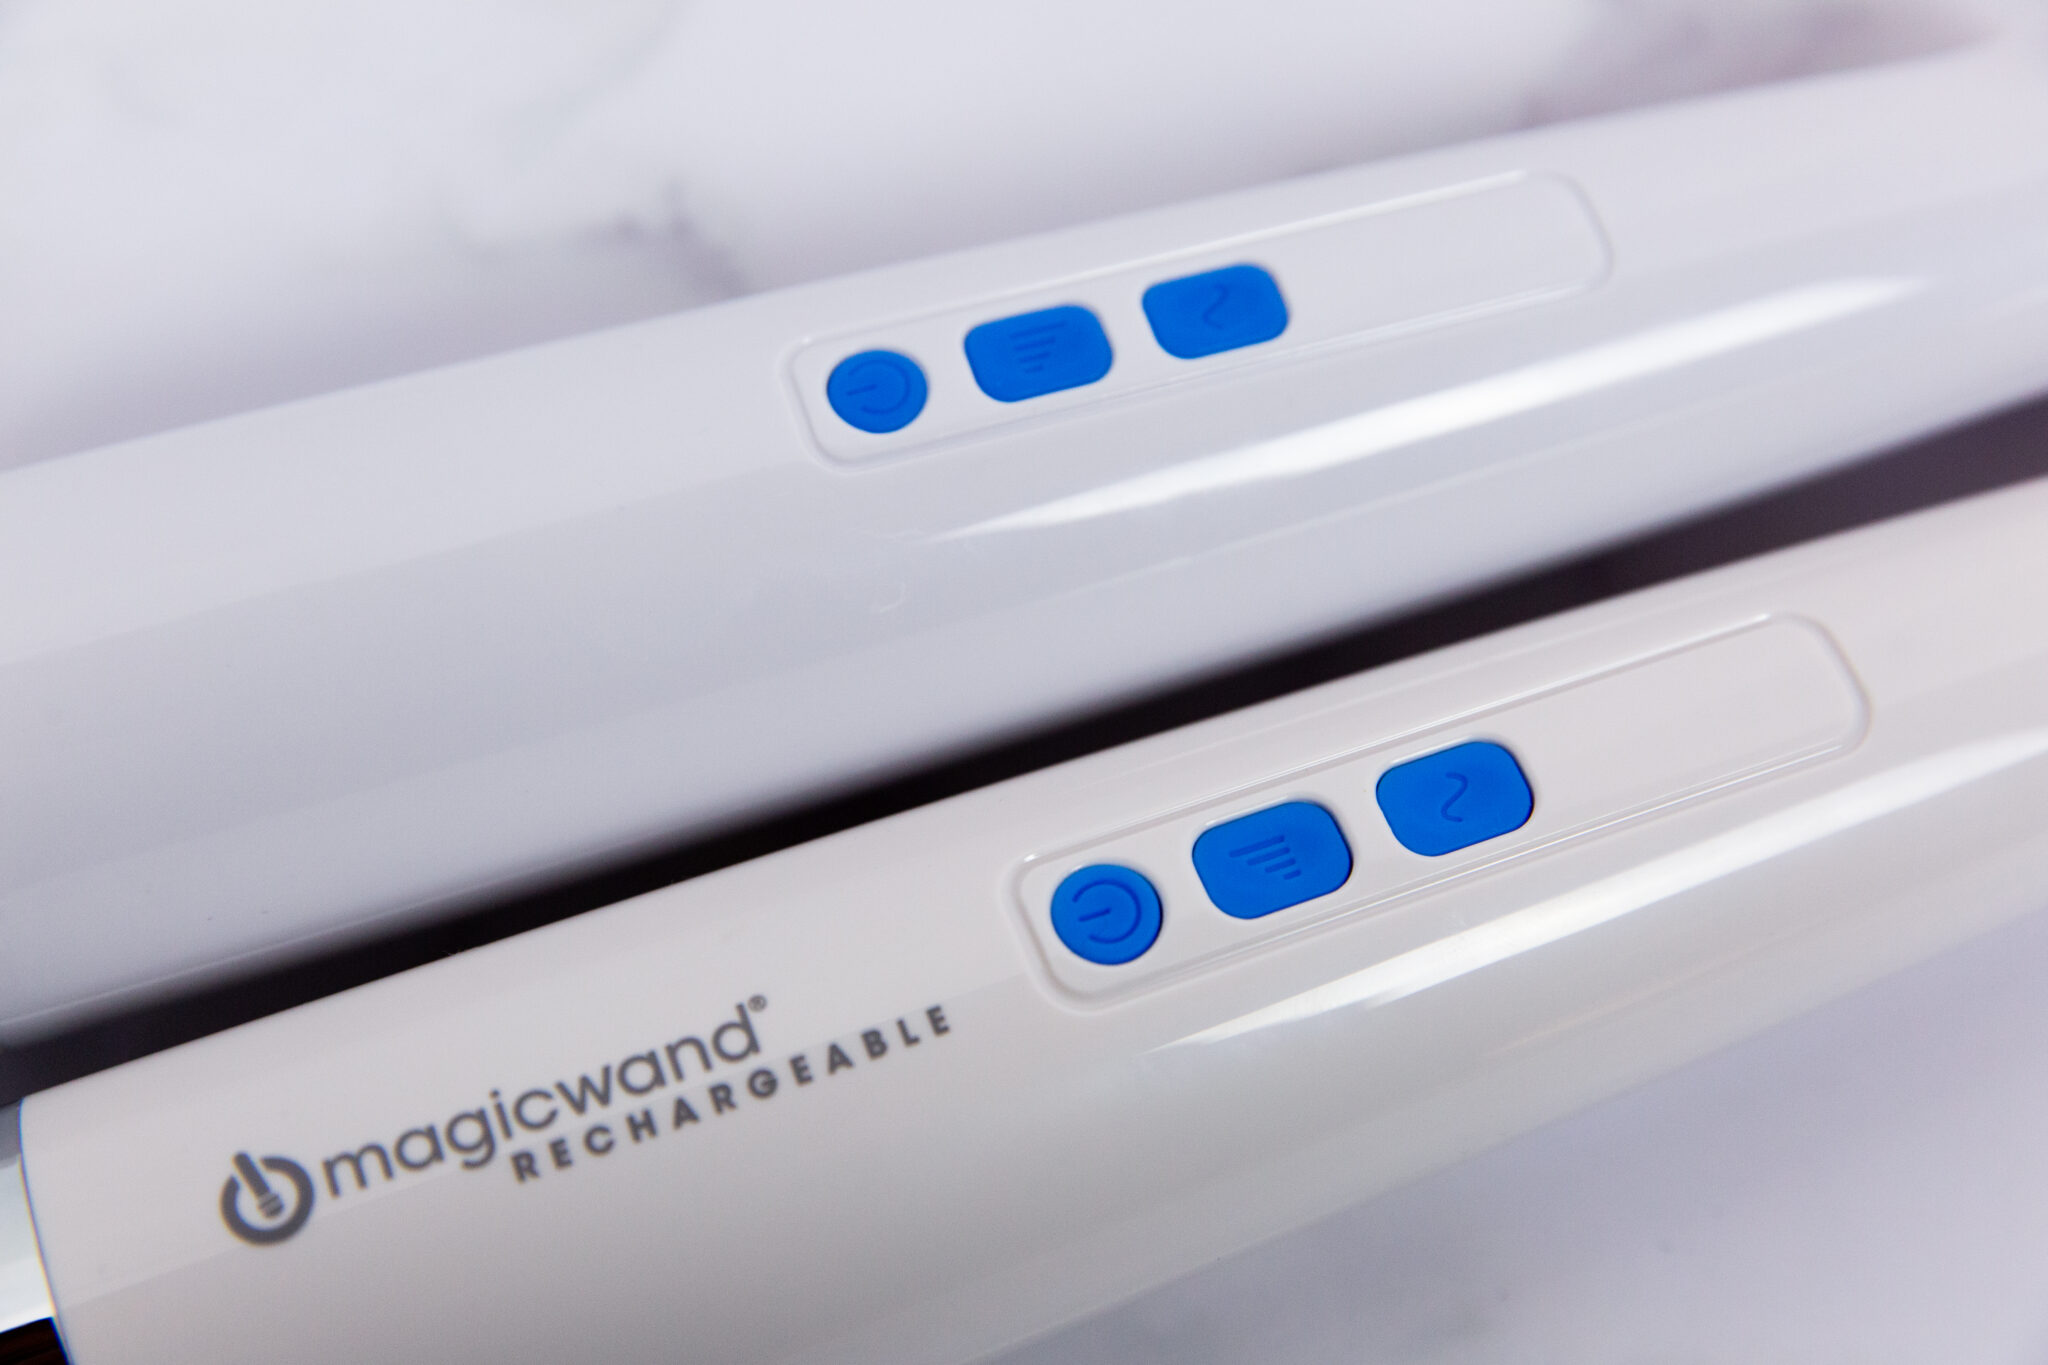 The Magic Wand (bottom) alongside the fake (top), showing the differences of their bodies and blue buttons.